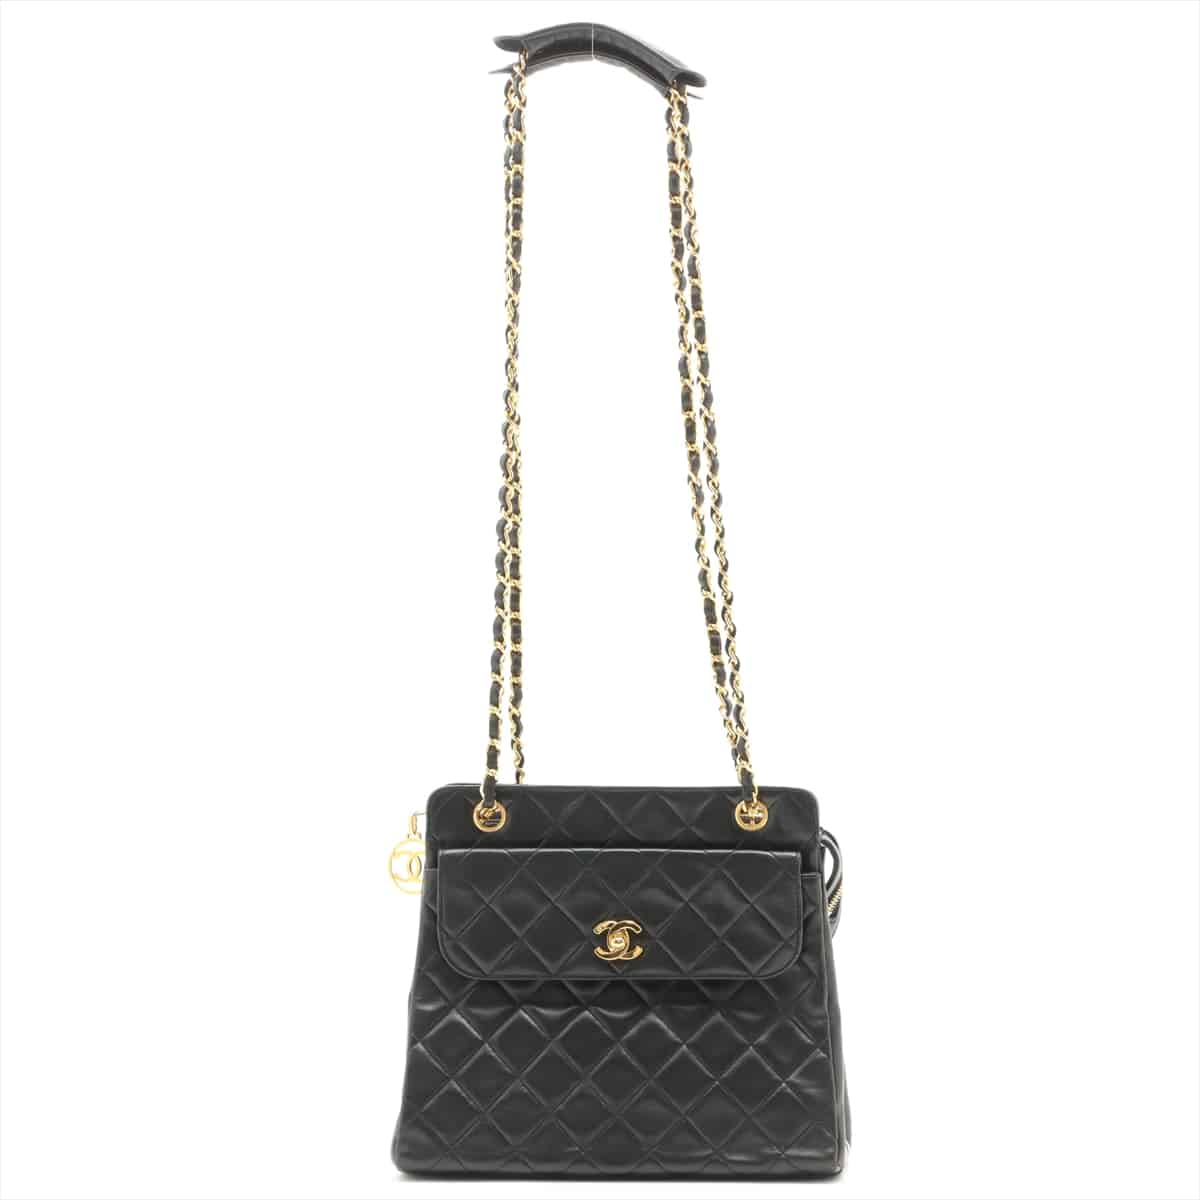 Chanel Coco Mark Caviarskin Chain tote bag Boublac Gold Metal fittings 1XXXXXX